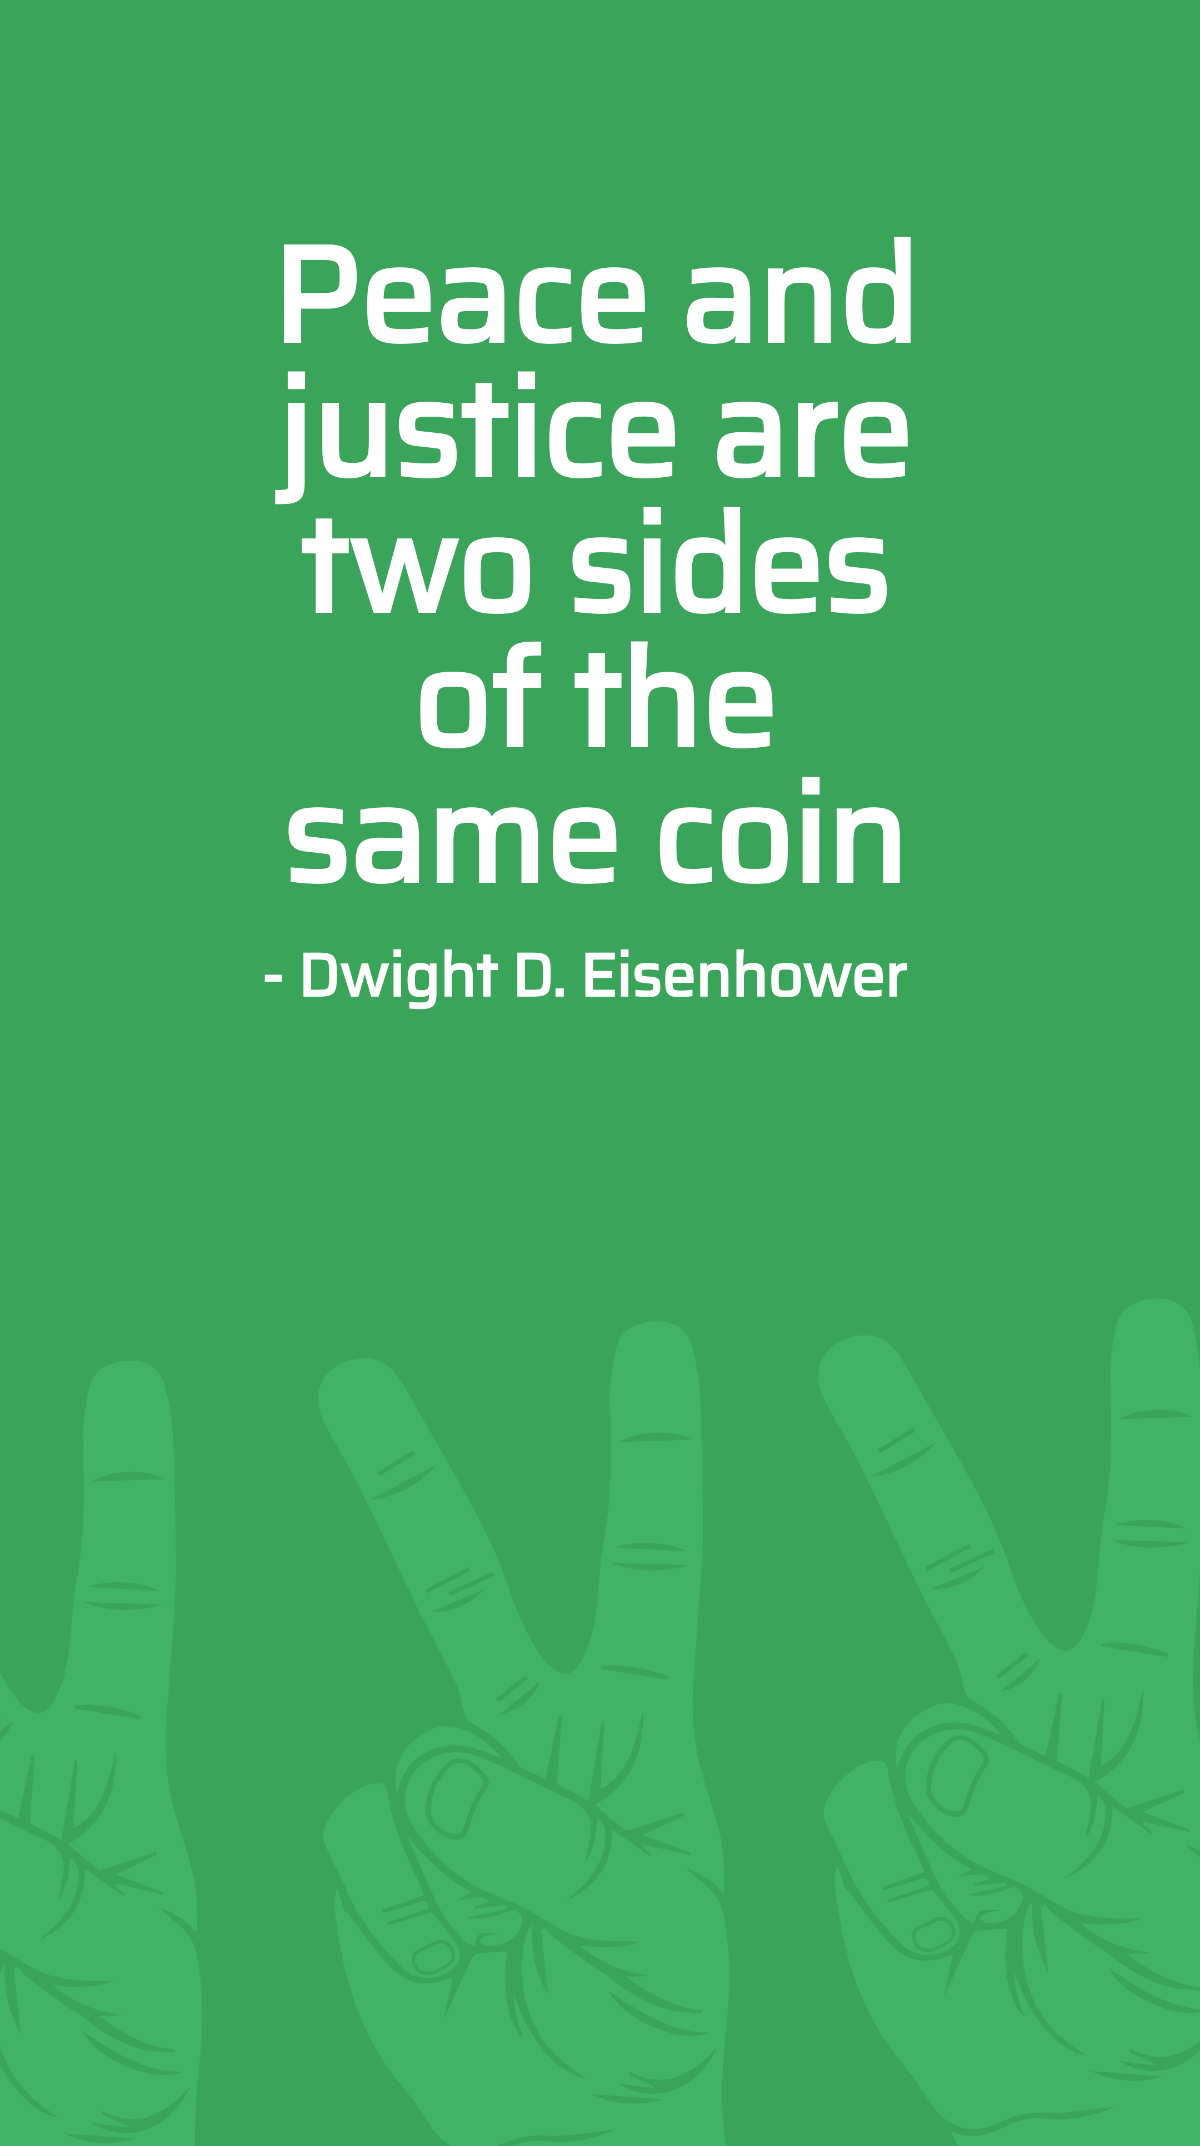 Free Dwight D. Eisenhower - Peace and justice are two sides of the same coin Template